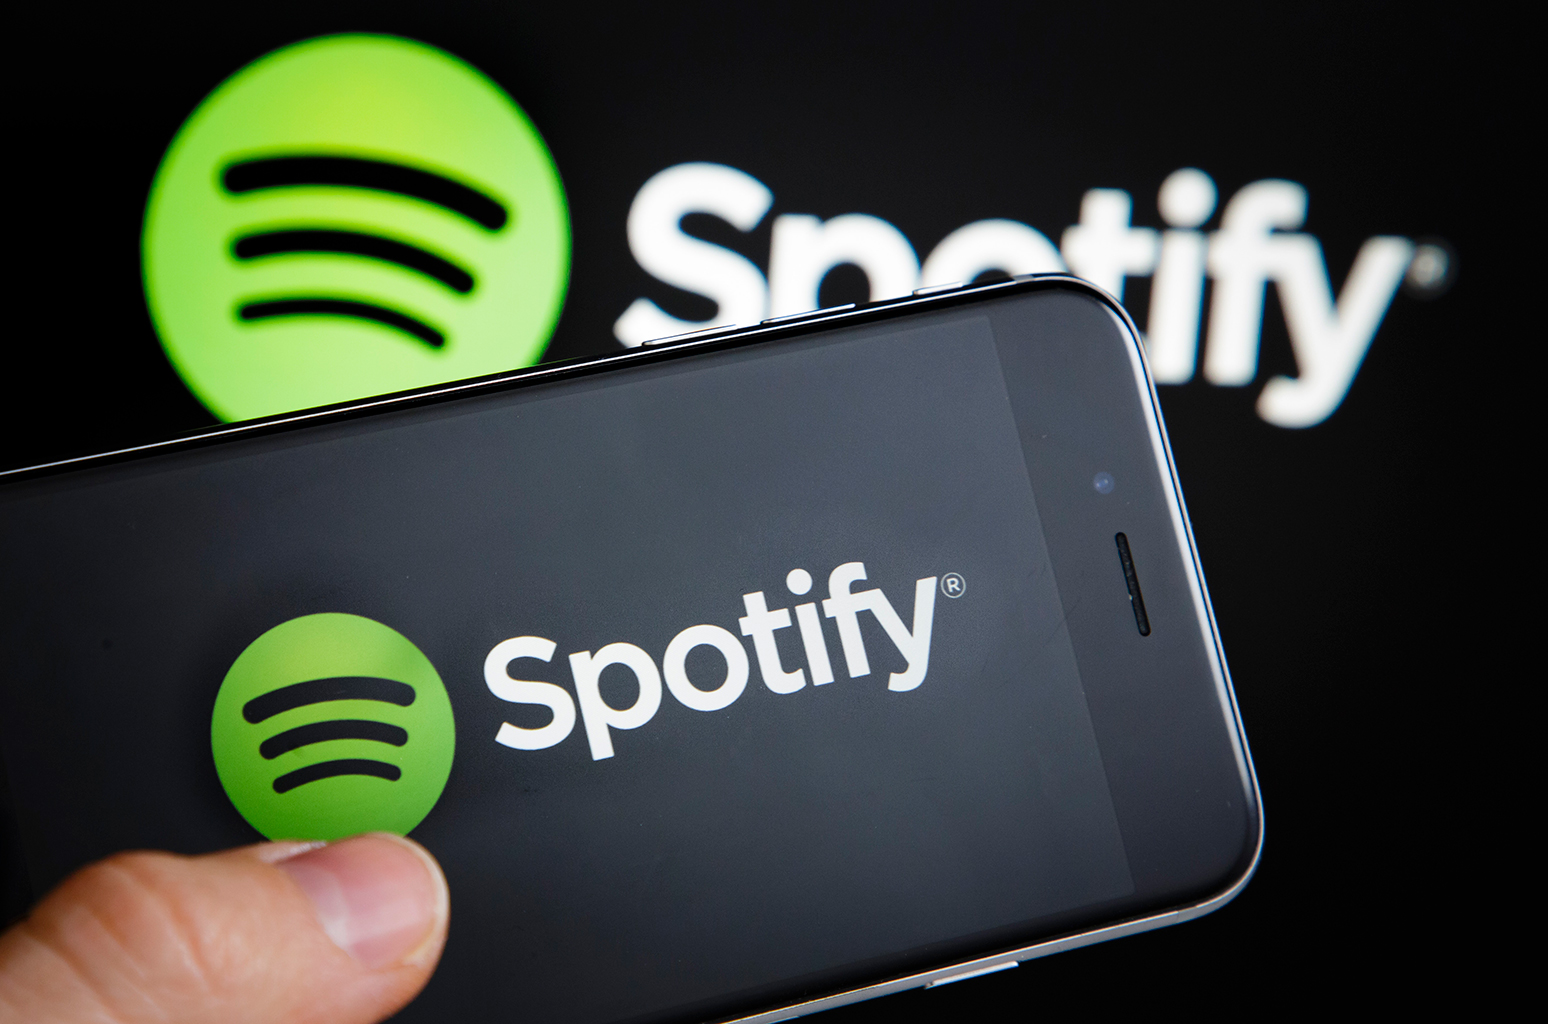 The new future Spotify alteration that will overwhelm you